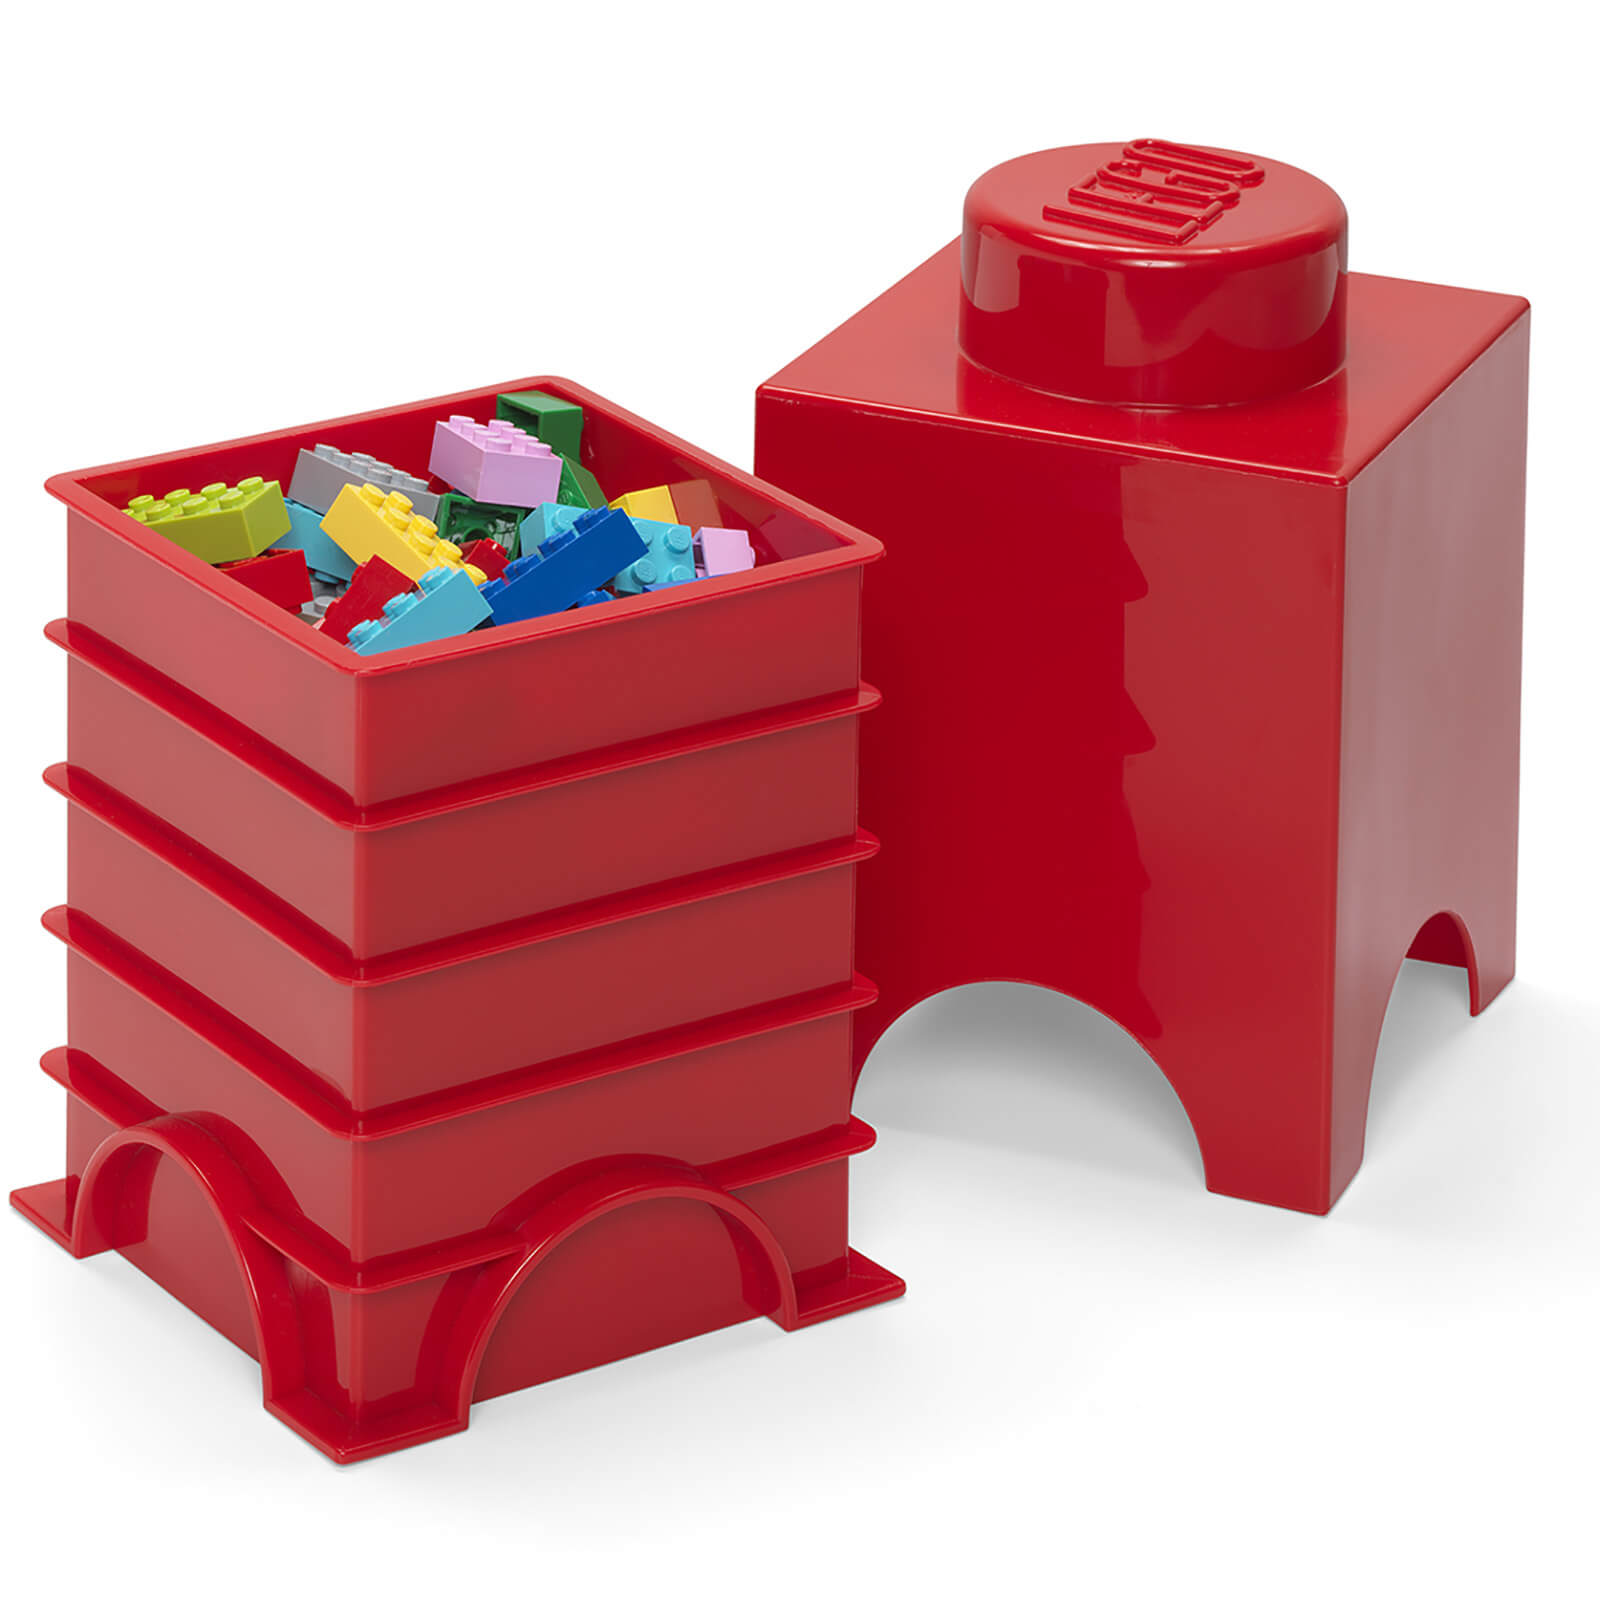 Lego 1 Stud Brick Container - Red